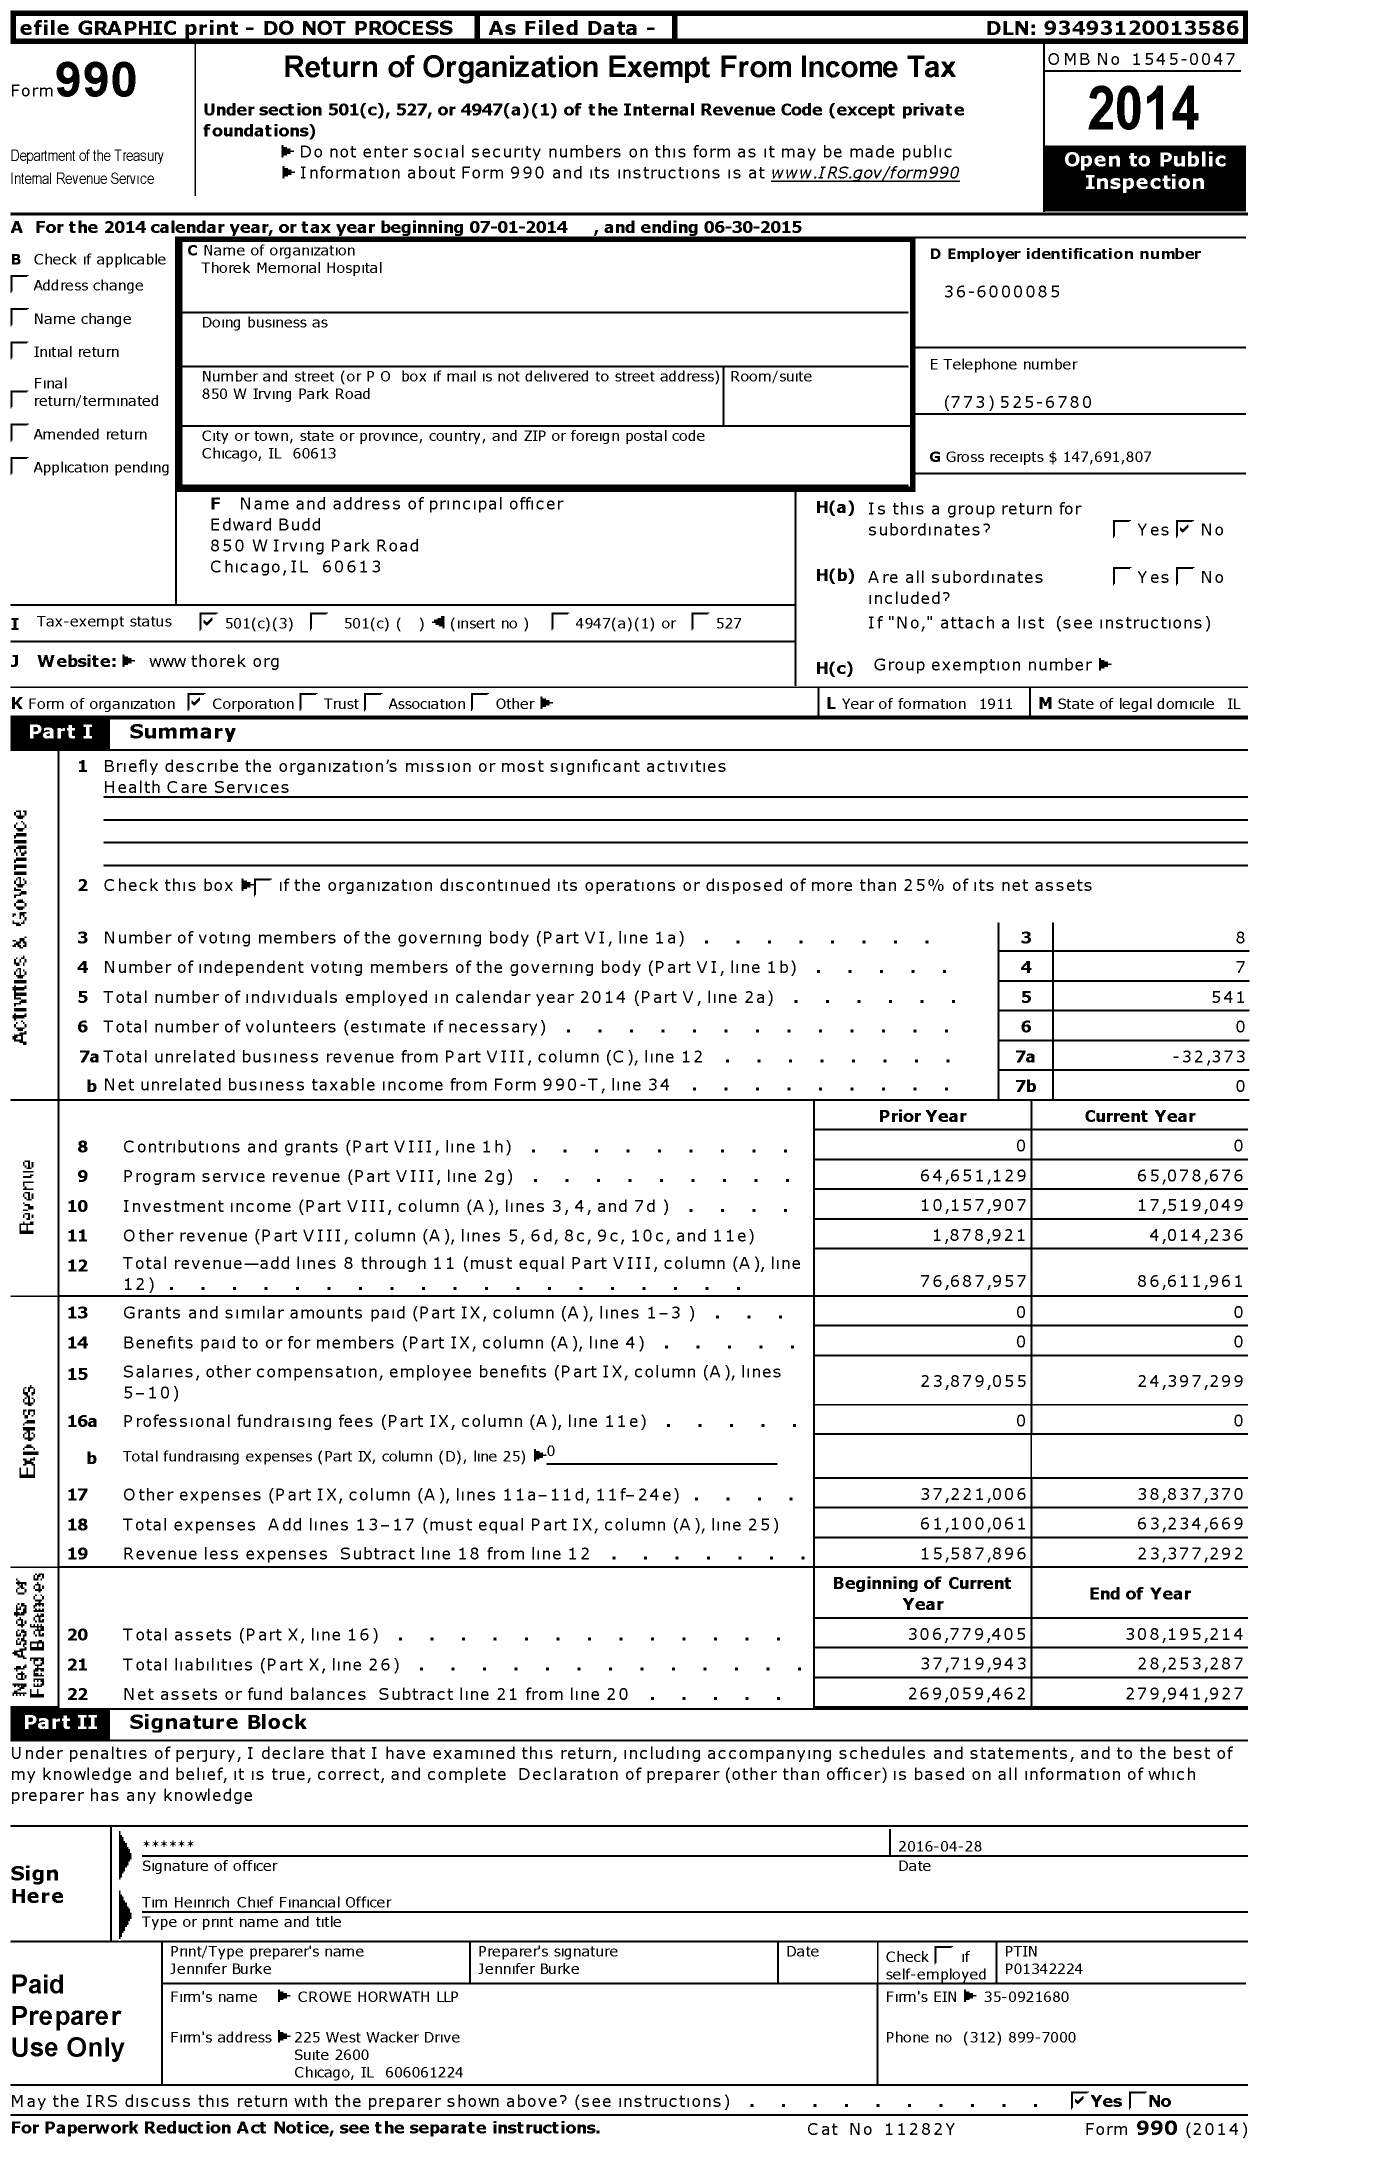 Image of first page of 2014 Form 990 for Thorek Memorial Hospital